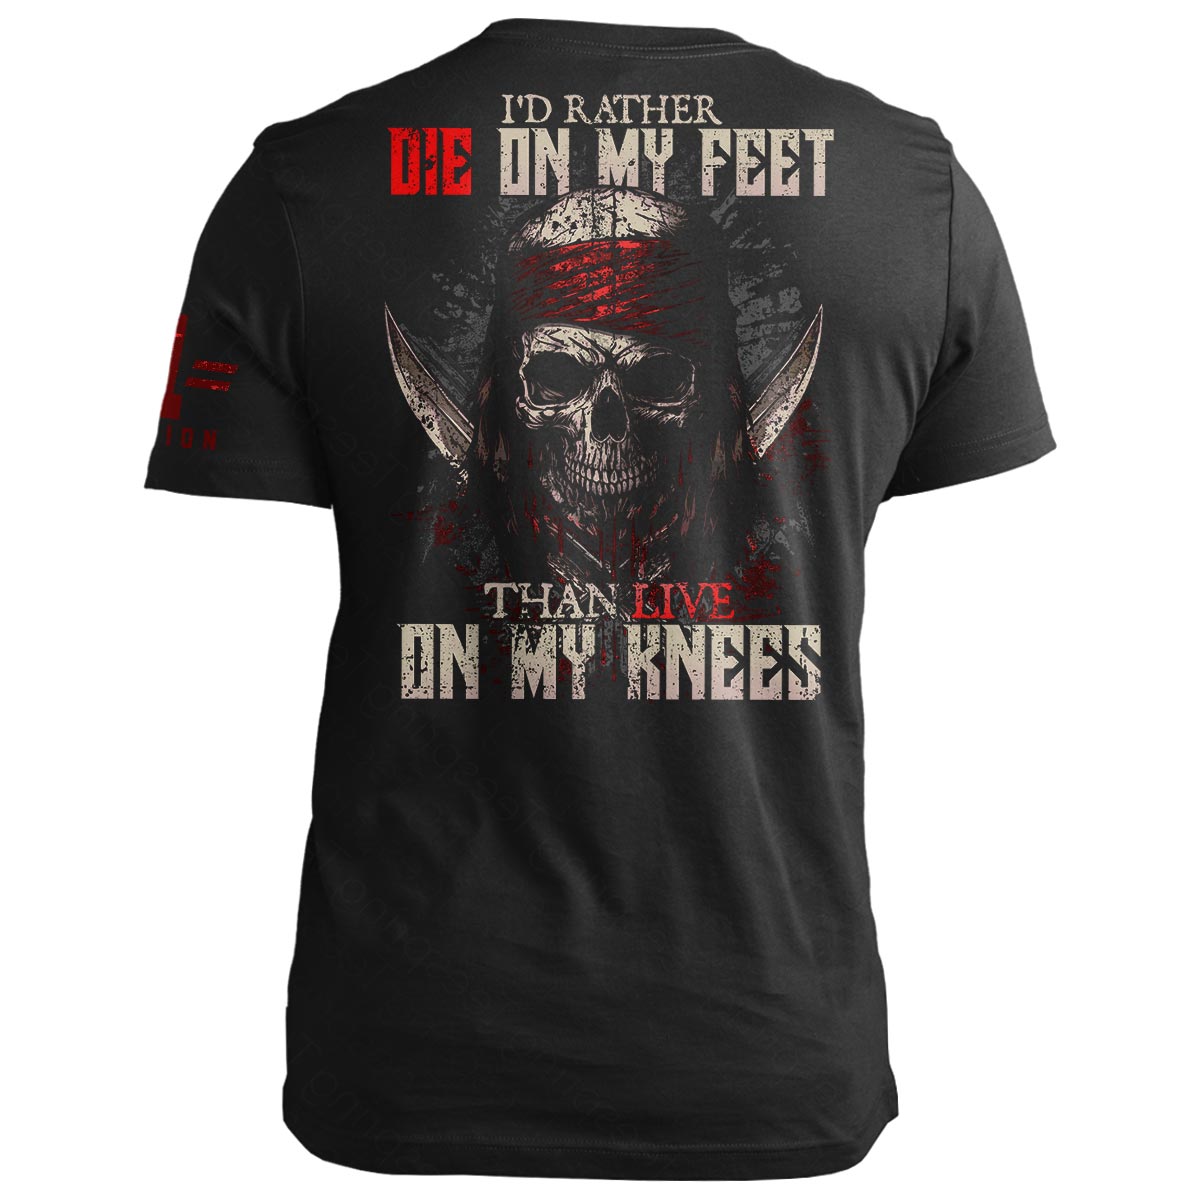 Die on my Feet: Pirate Edition